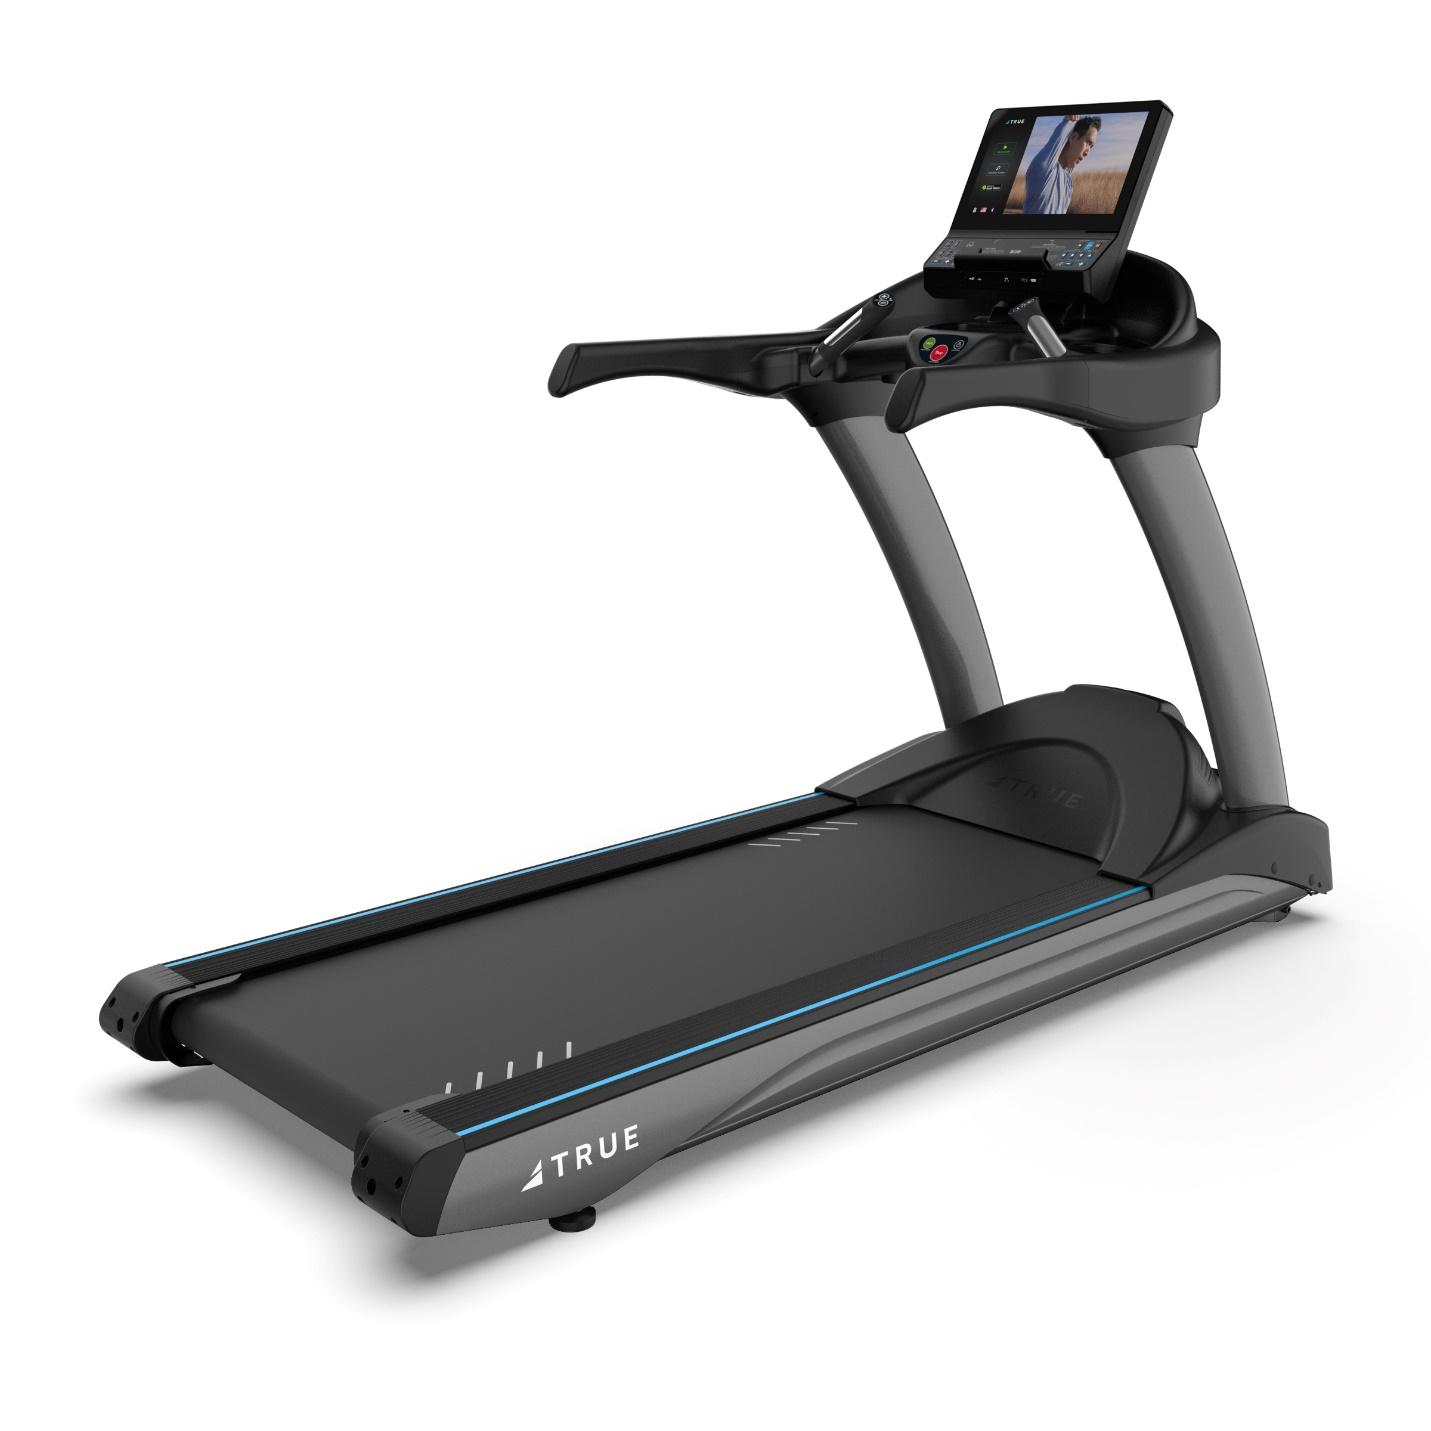 Showrunner II Consoles, with included wireless phone chargers, sold with fitness equipment